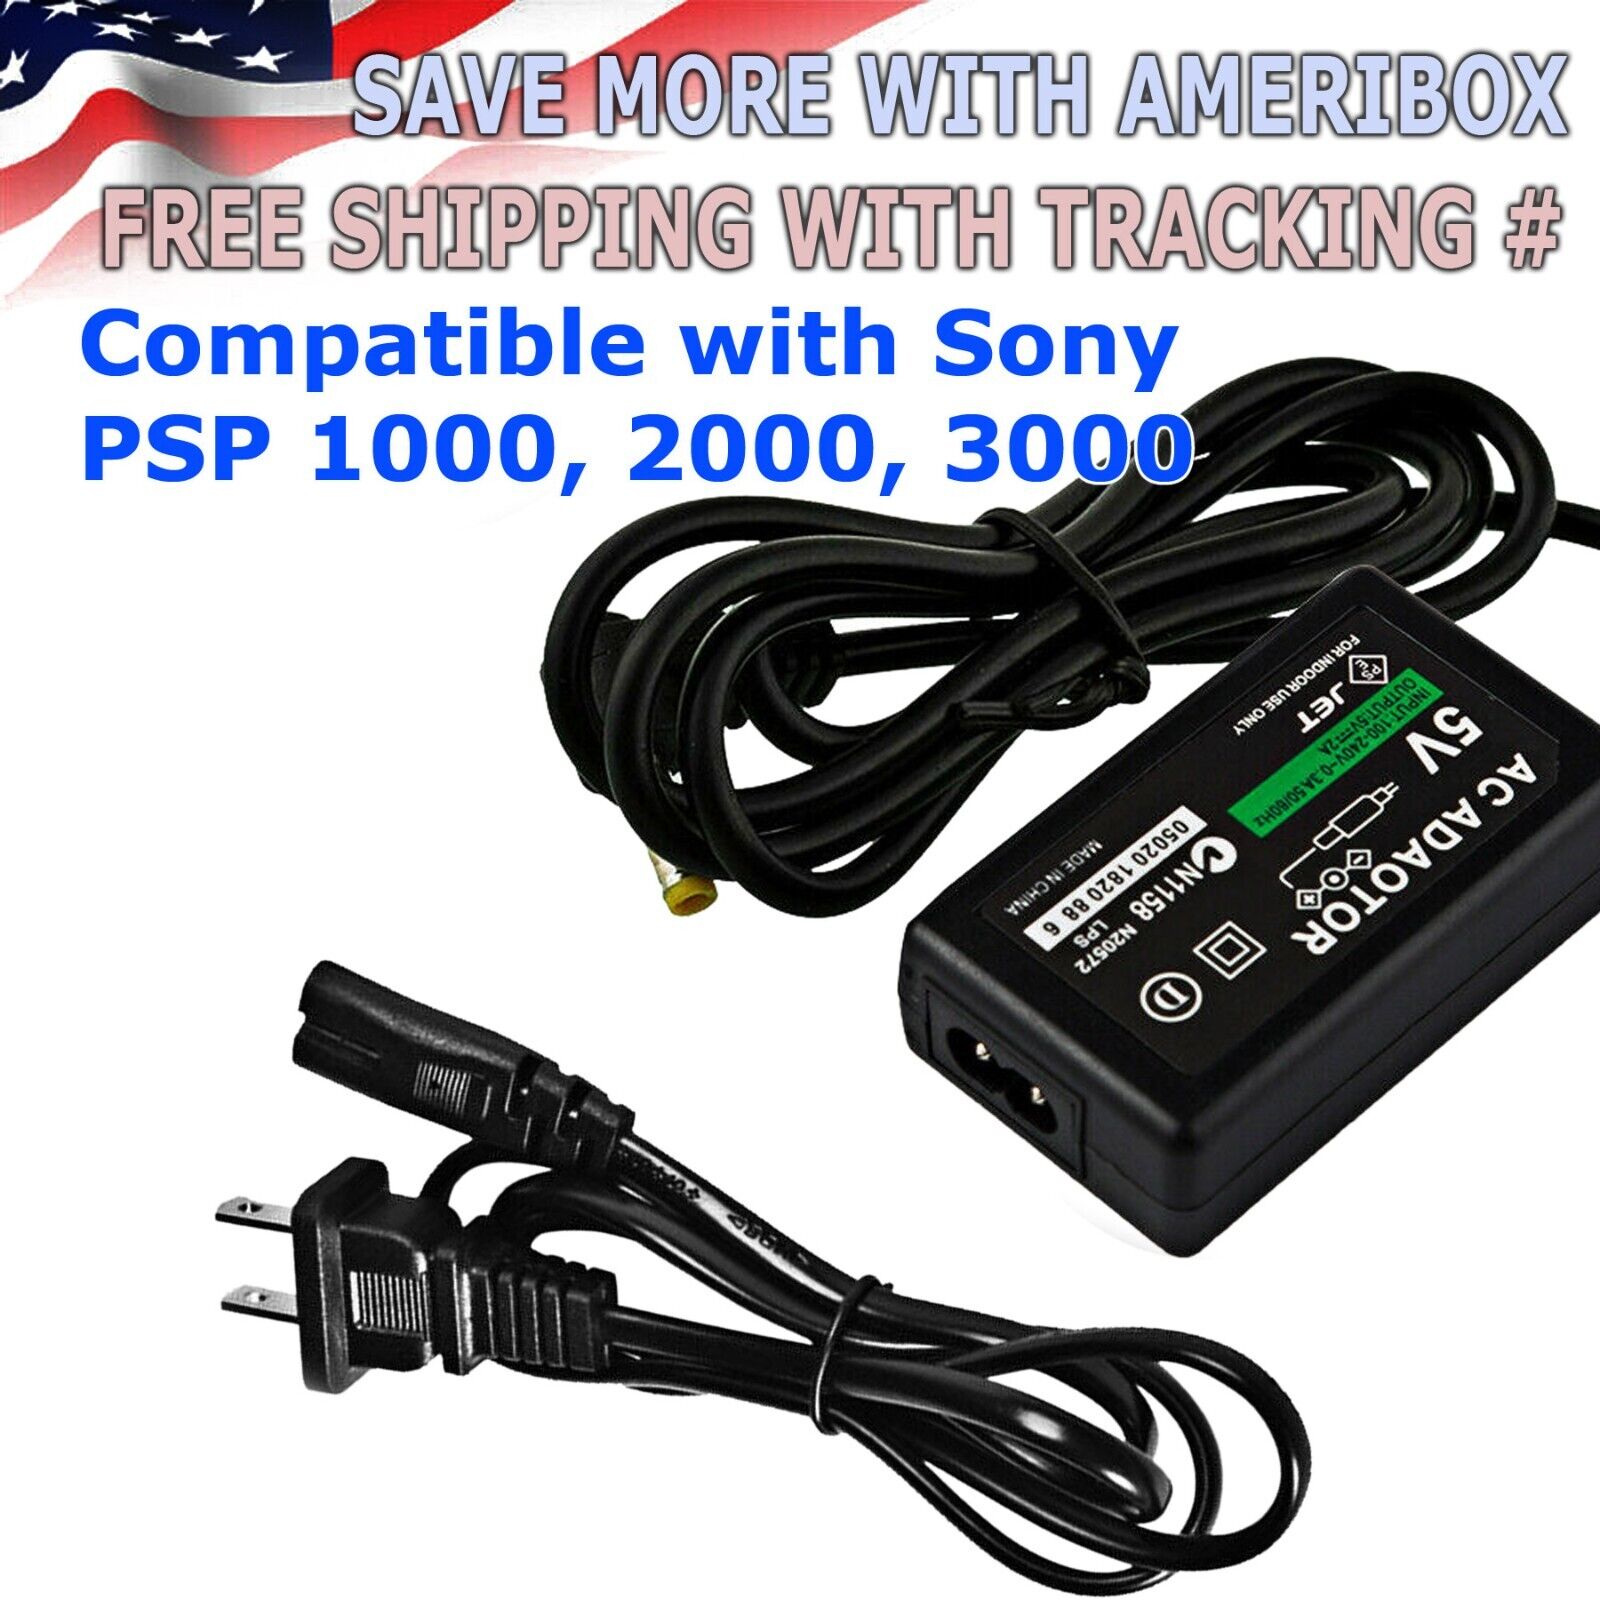 AC Adapter Home Wall Charger Power Supply For Sony PSP 1000 2000 3000 Slim Lite Model Sony PSP 1000 / 2000 / 3000 Coun